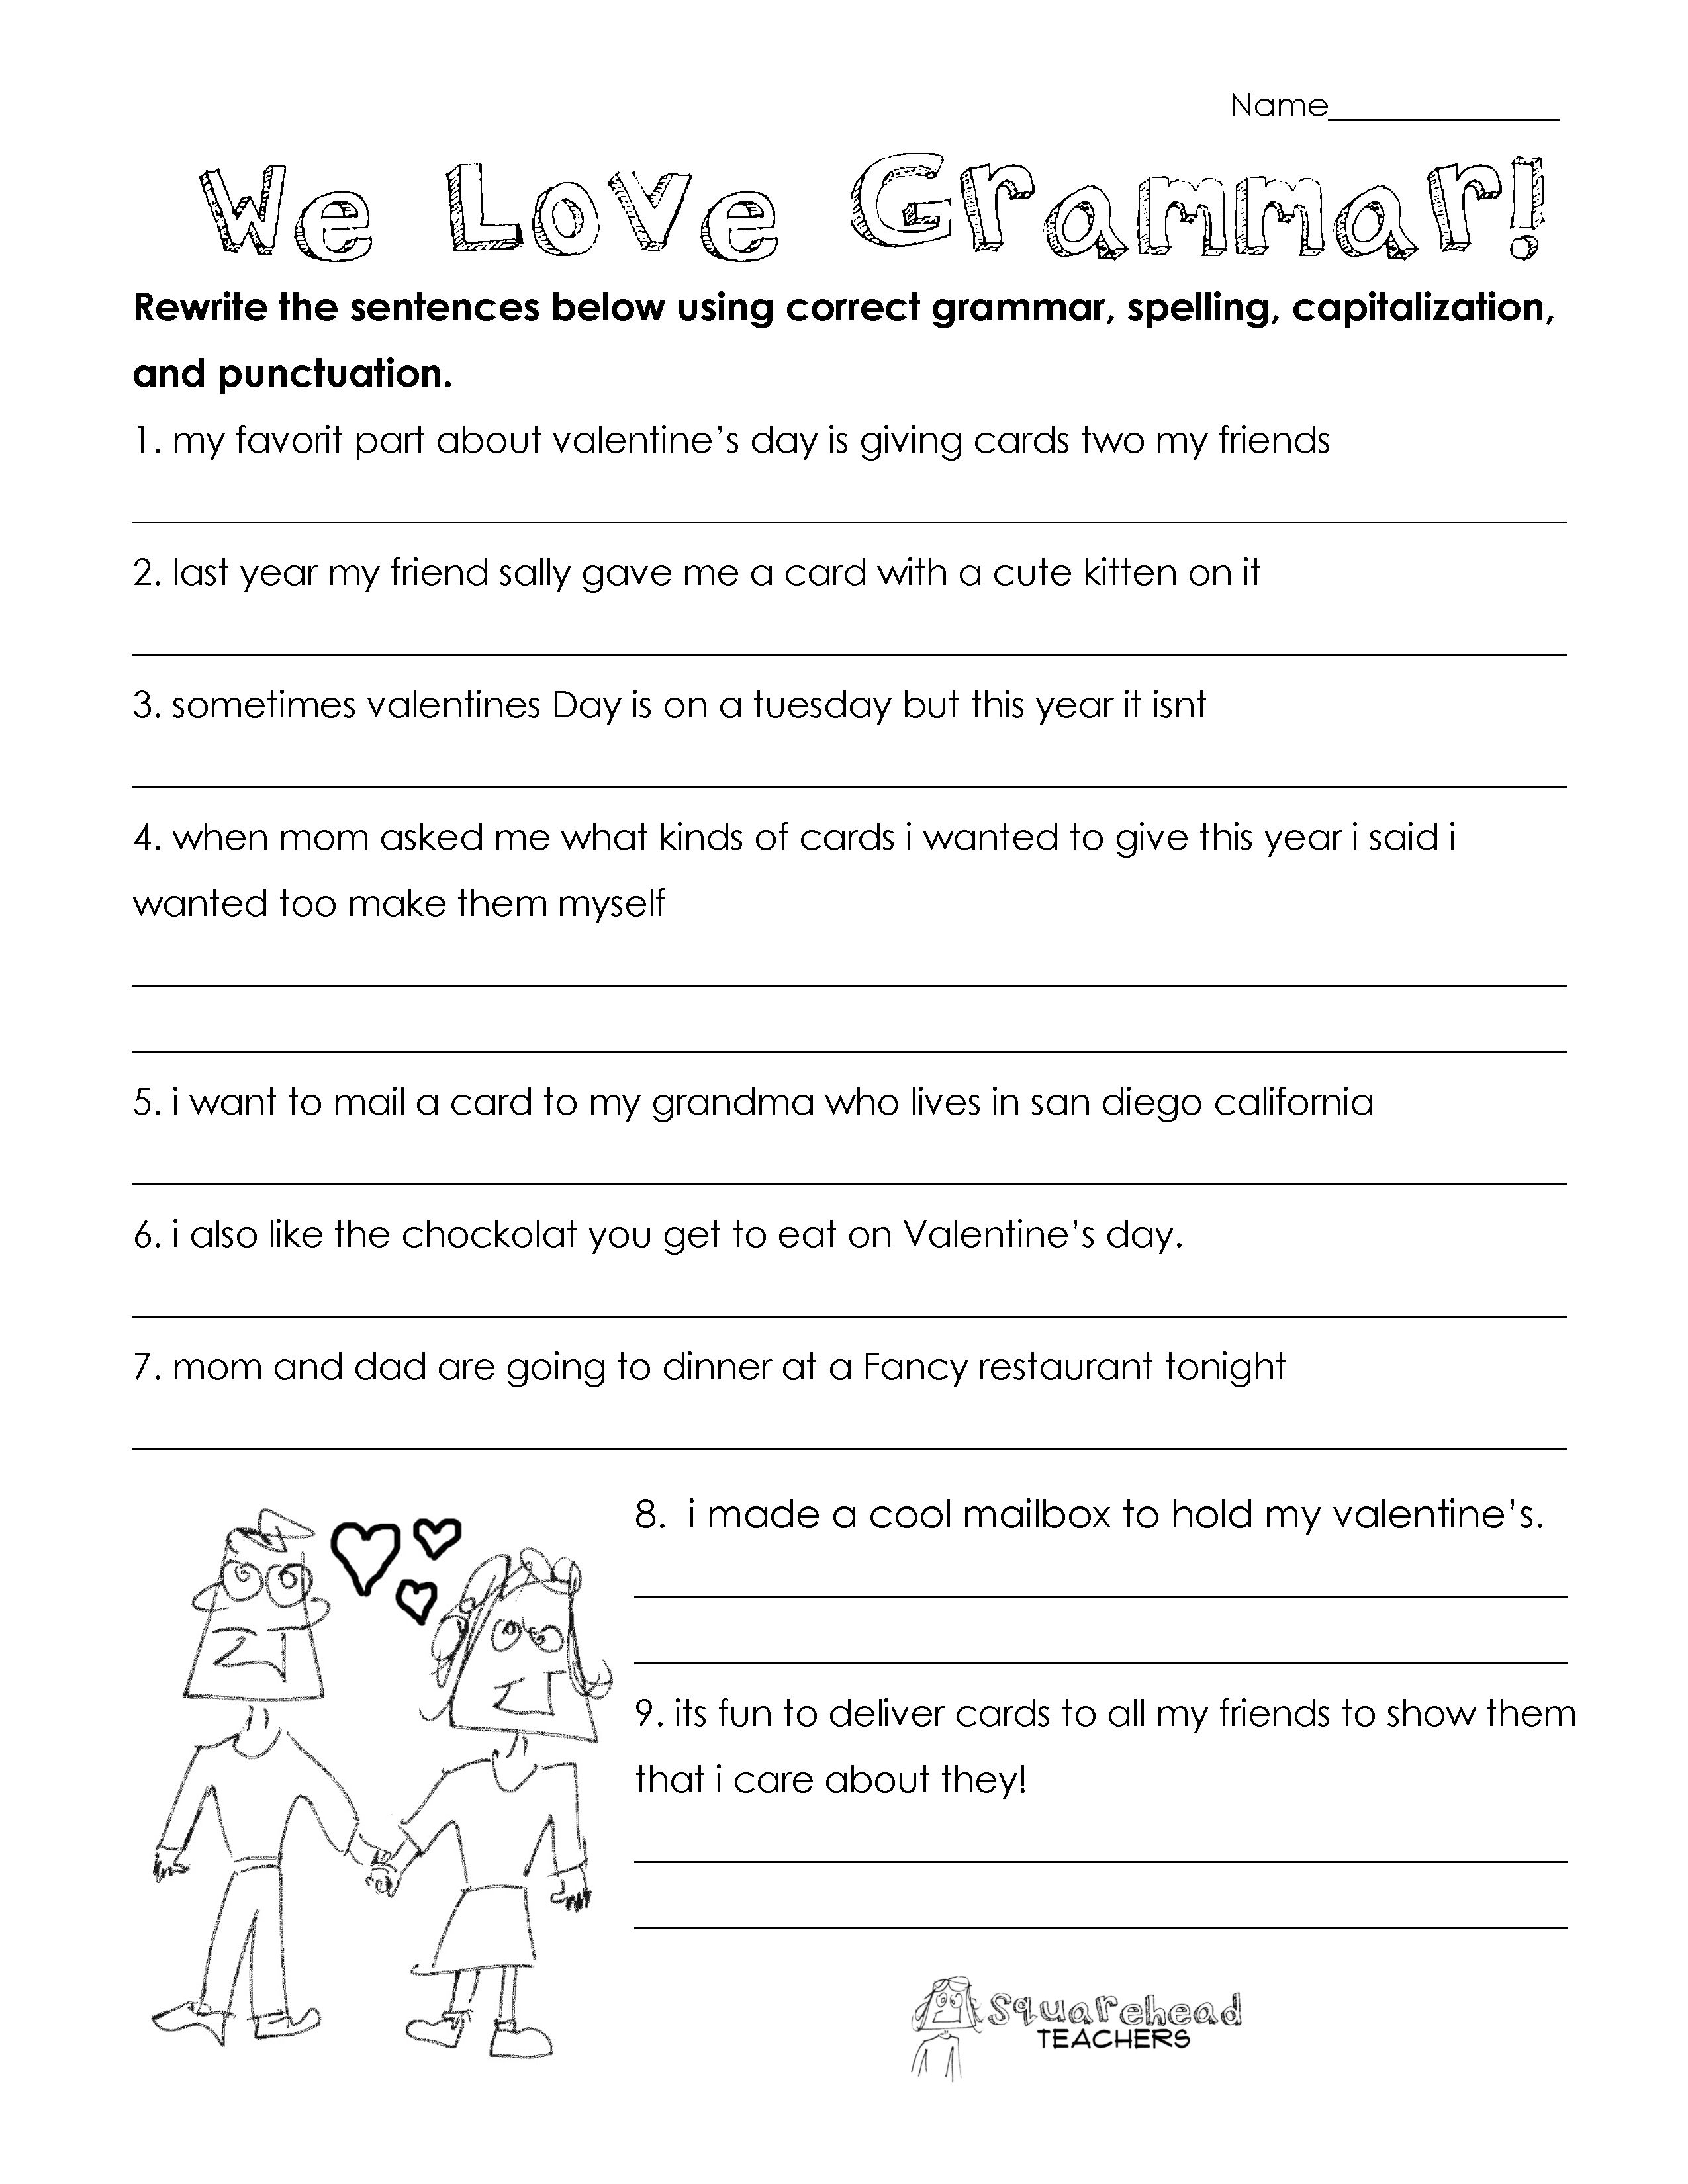 This Grammar Practice Worksheet Seems A Bit Too Tough For The | Printable Editing Worksheets